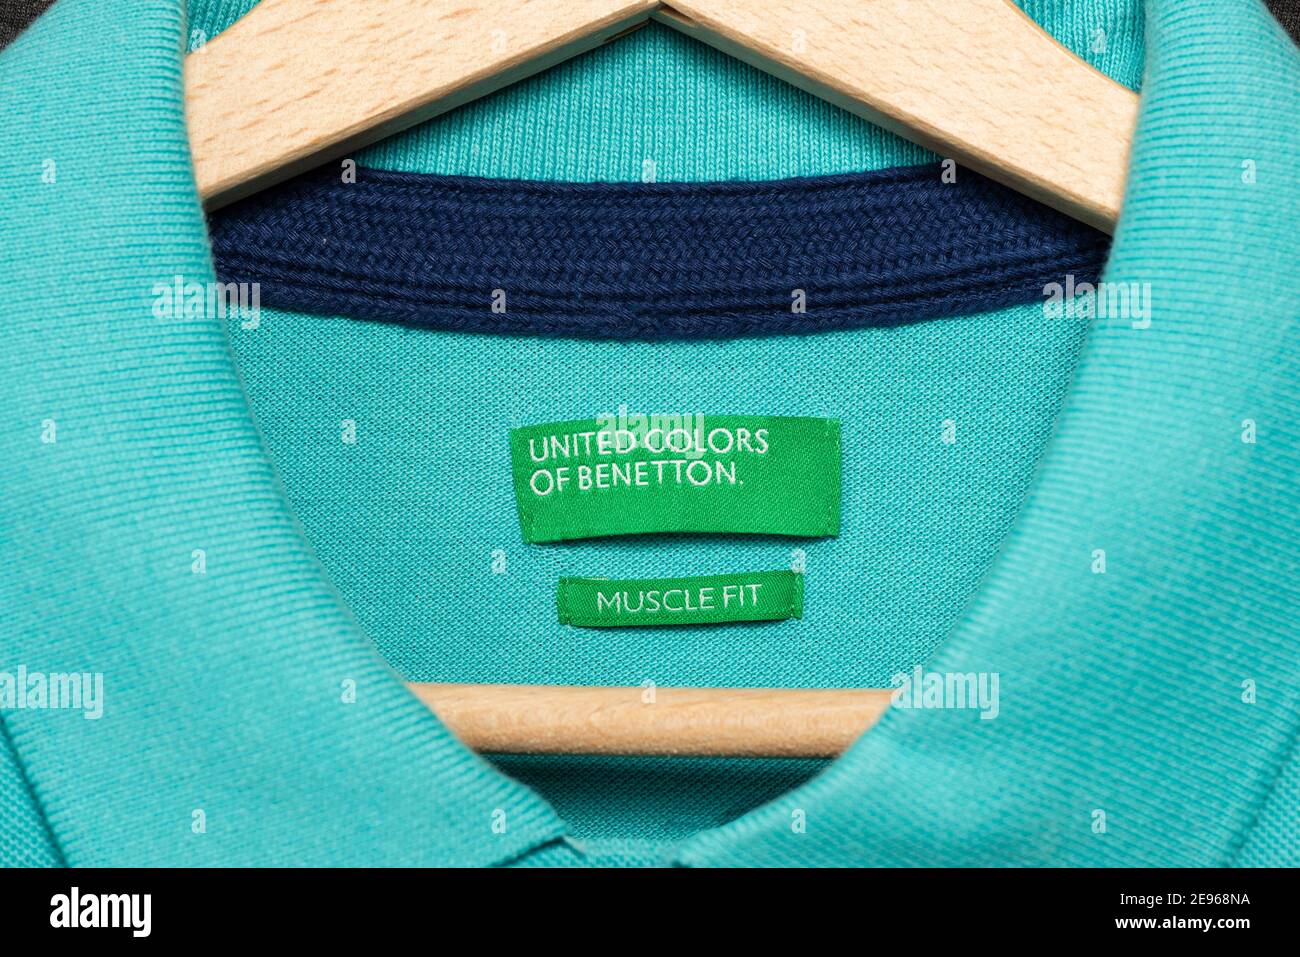 United Colors of Benetton Muscle Fit green label on teal tee shirt hanging  on wooden hanger Stock Photo - Alamy